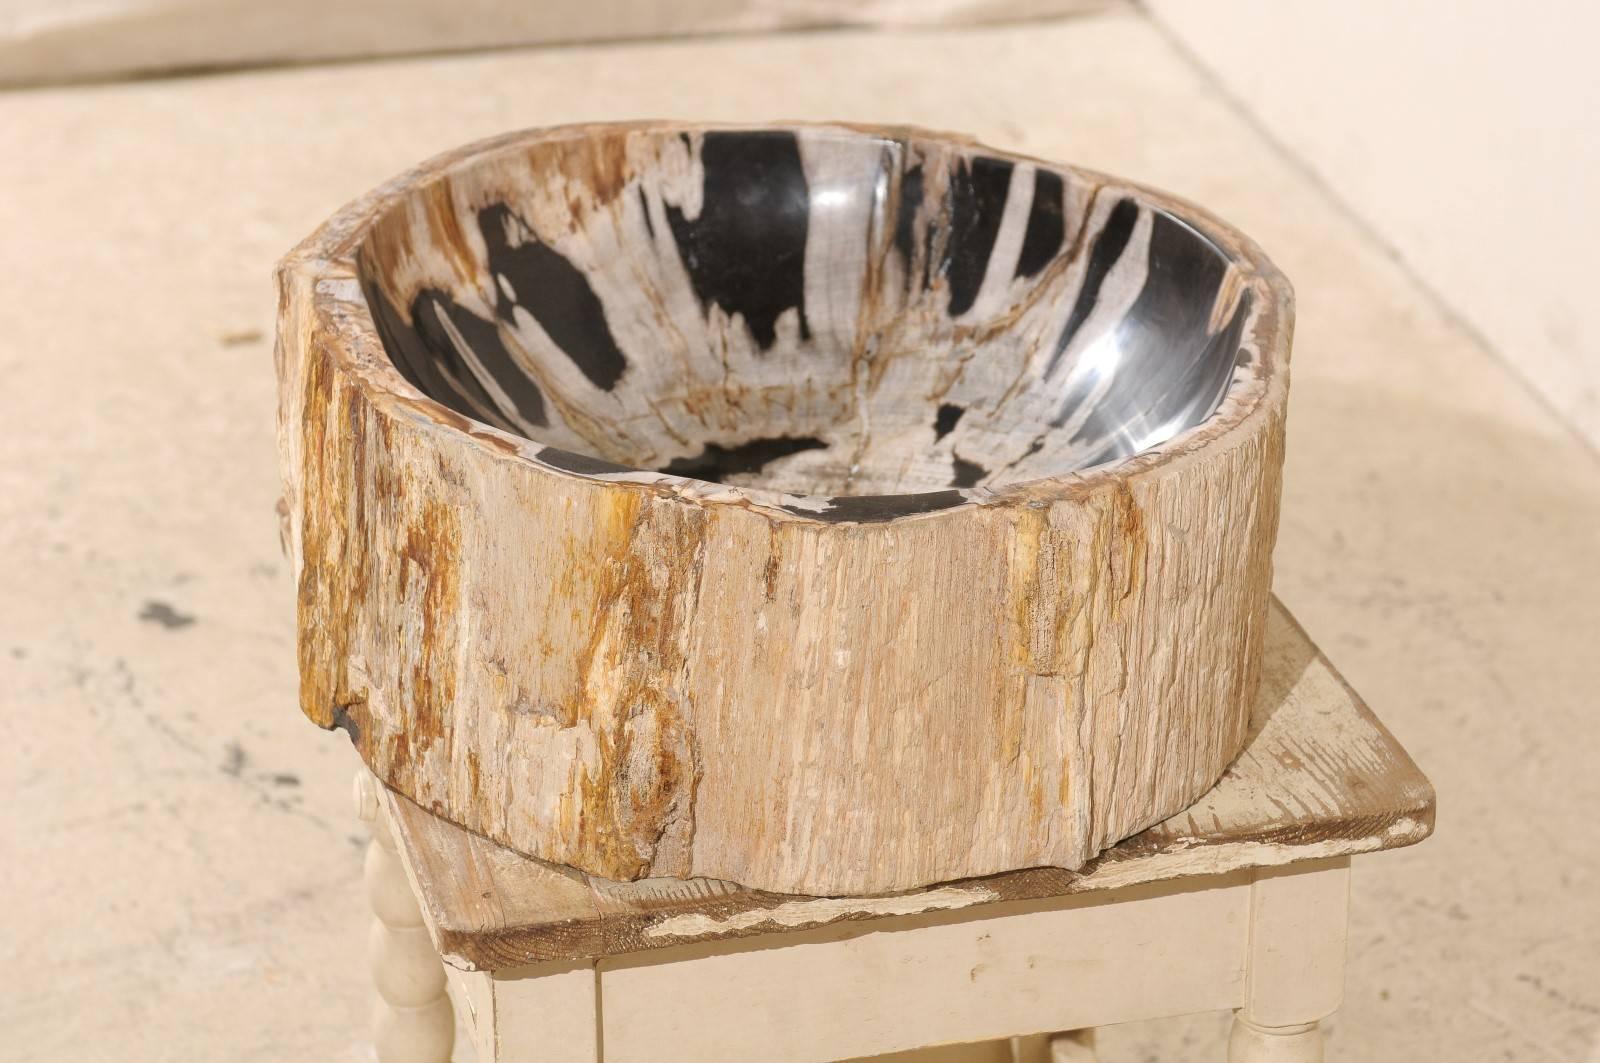 A black and cream colored petrified wood sink. This sink features tan, warm brown and cream colors on the outside. The inside of the sink has an organically formed off-white color with nice black patches throughout. Petrified wood is a fossil. Over